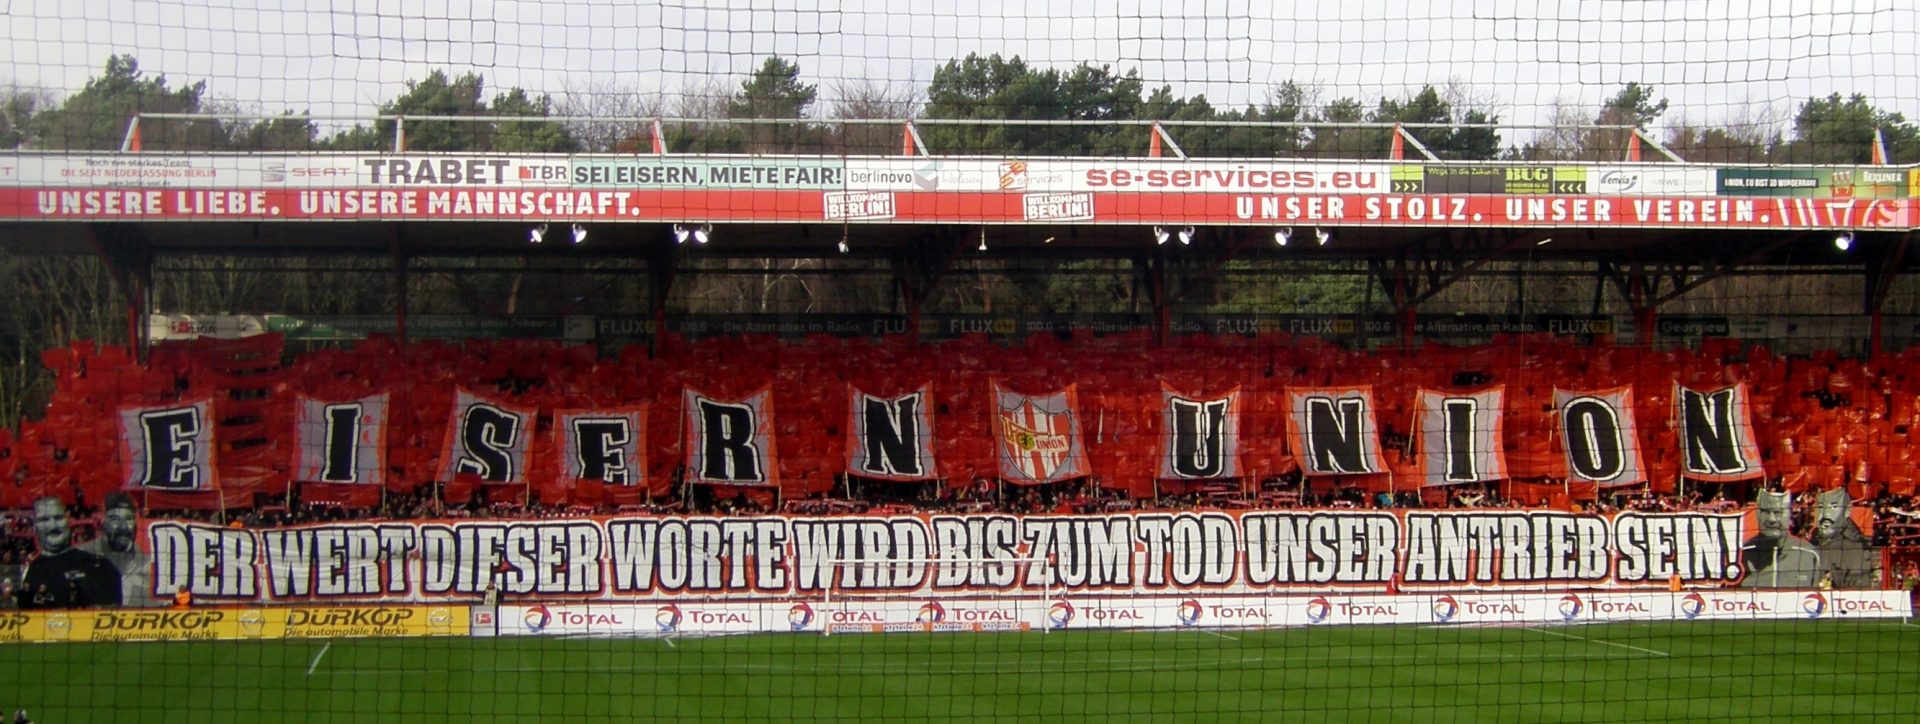 Union Berlin - 1. FC Union Berlin find form and beat Hamburg 2-0 ... : The winner after the first and second leg makes the leap into the group stage.